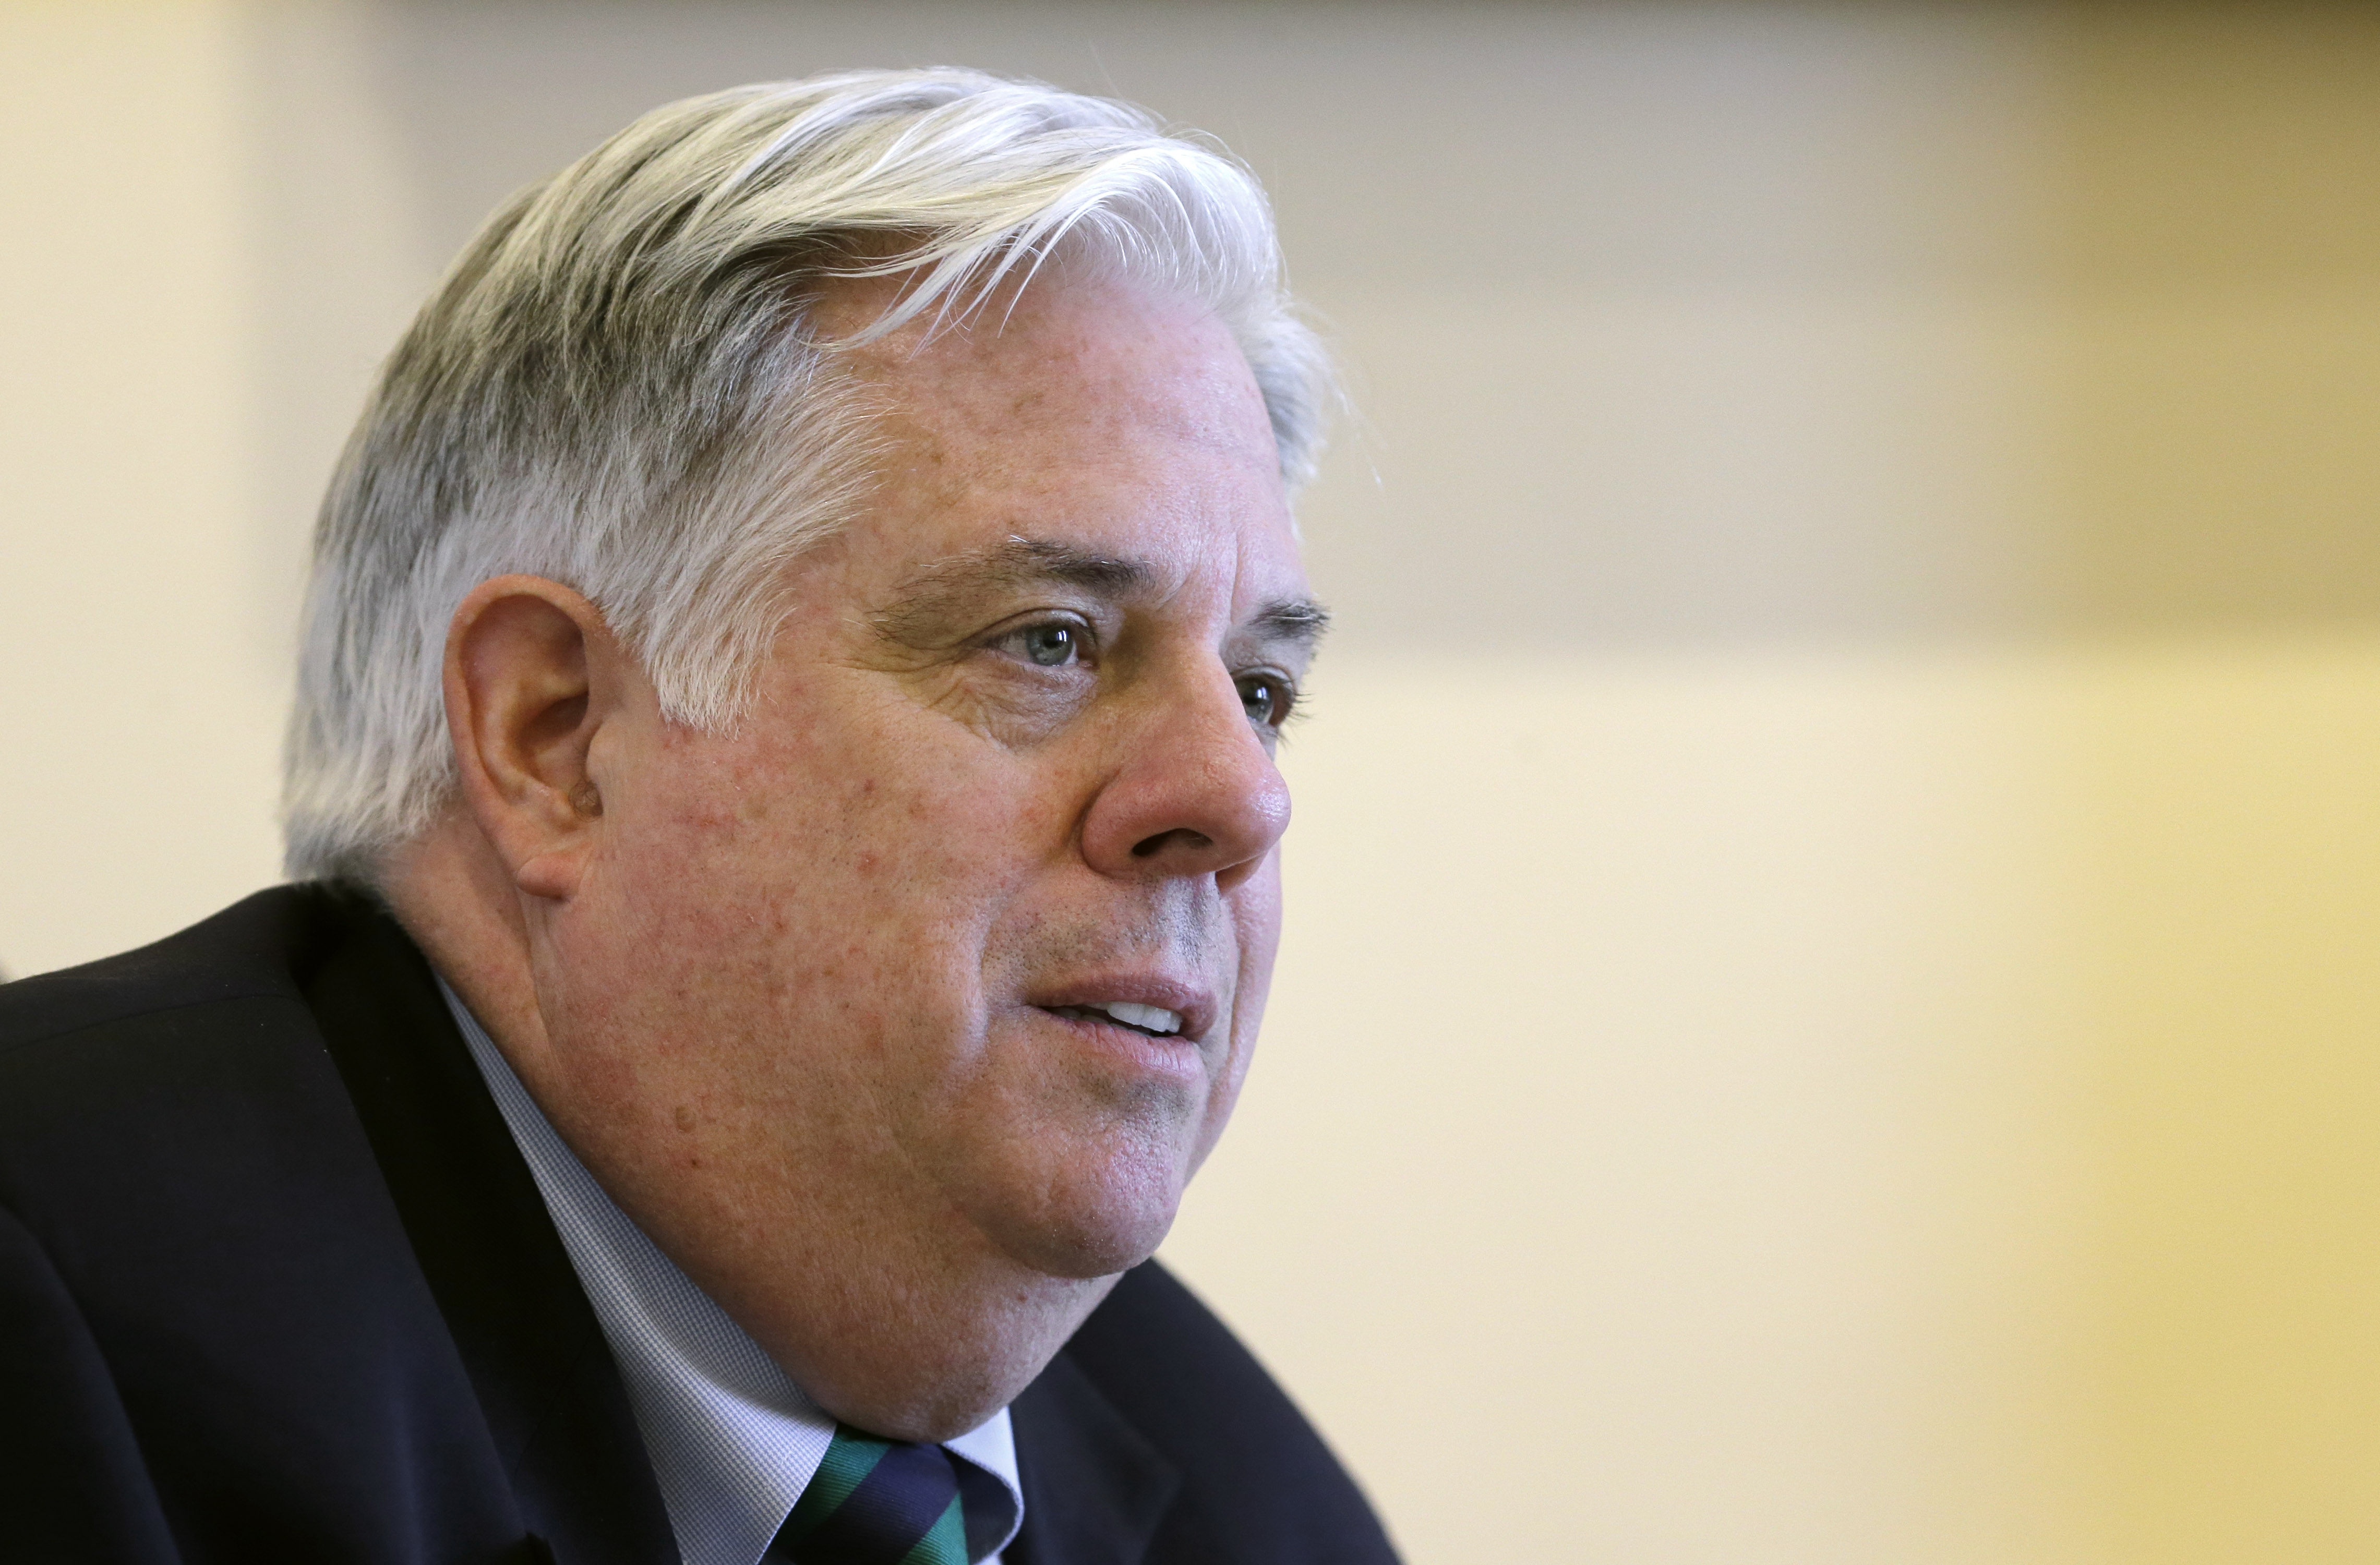 Maryland Gov. Larry Hogan at an interview in Annapolis, Md on April 6, 2015. (Patrick Semansky—AP)